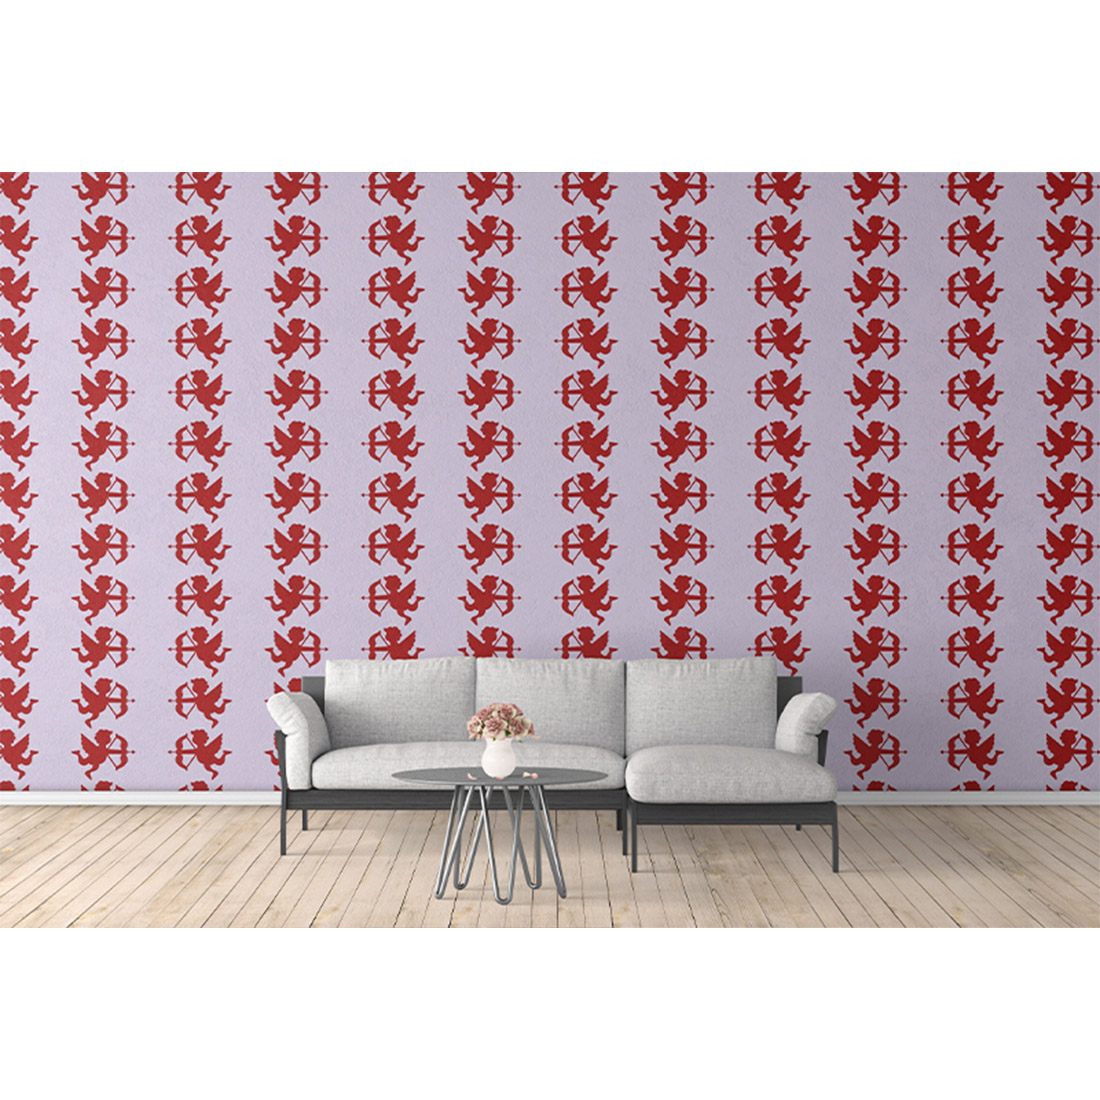 Image with adorable cupid patterns